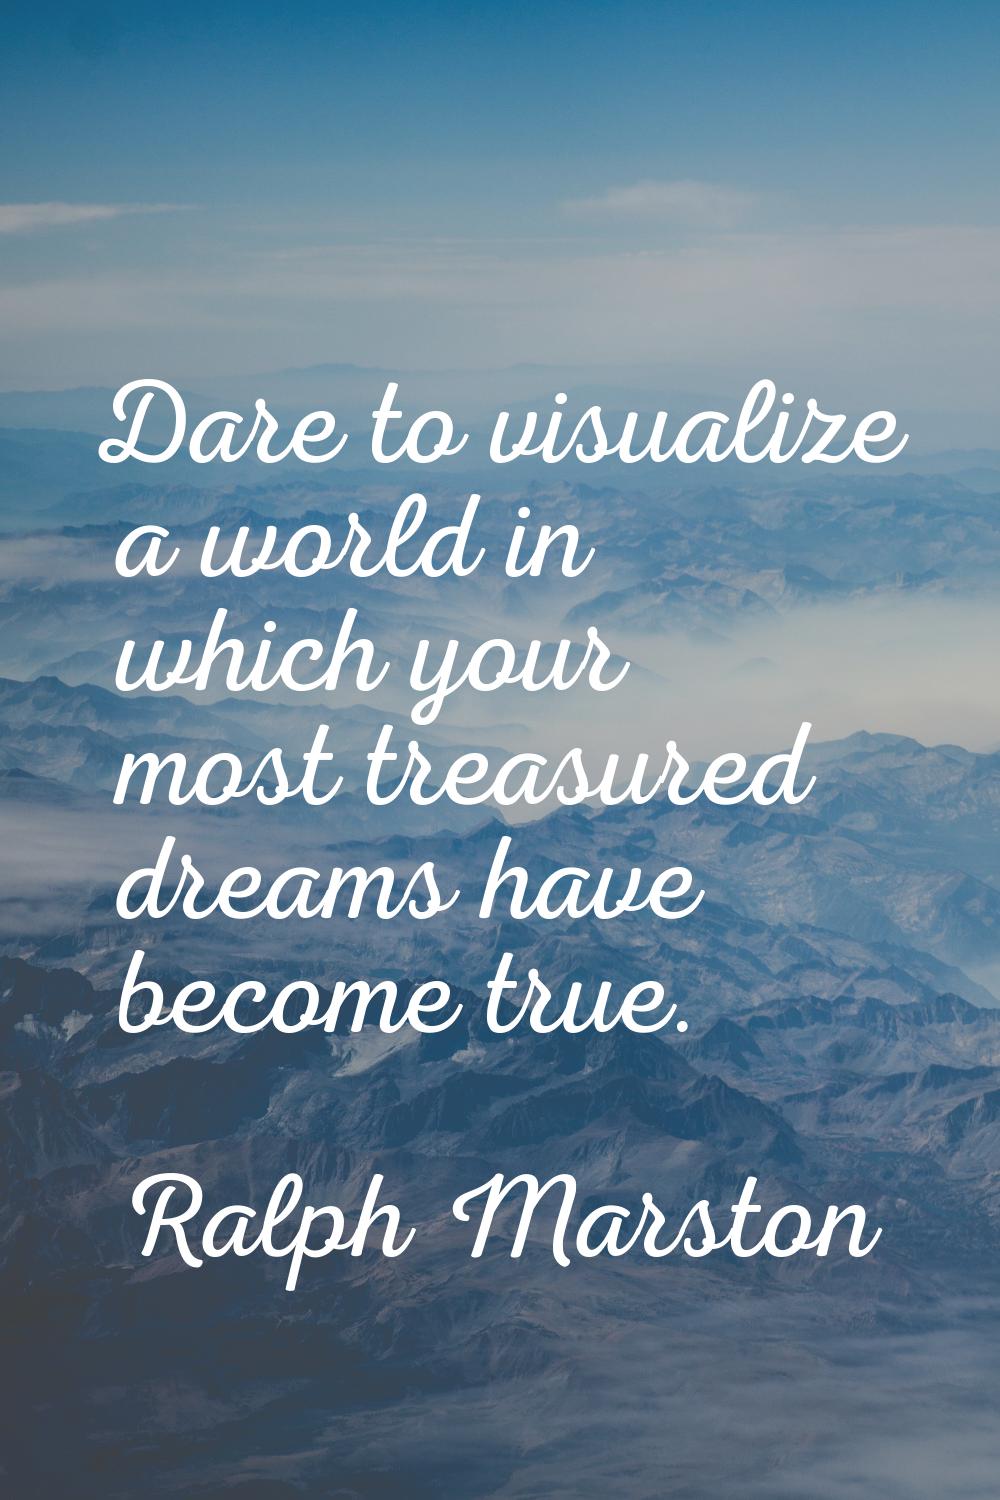 Dare to visualize a world in which your most treasured dreams have become true.